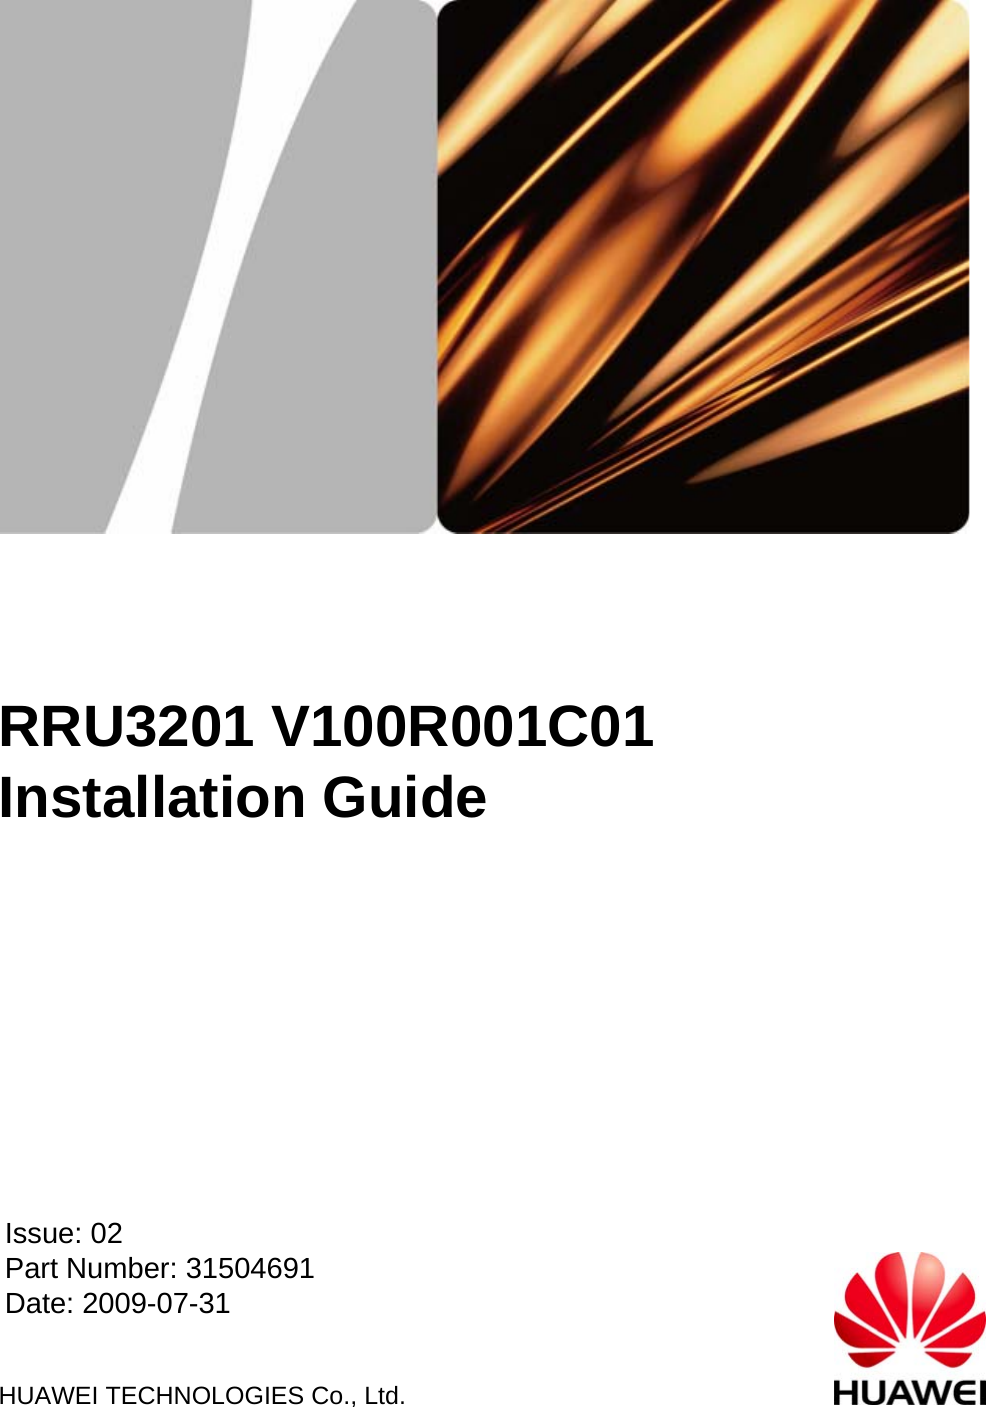 HUAWEI TECHNOLOGIES Co., Ltd.Issue: 02Part Number: 31504691Date: 2009-07-31RRU3201 V100R001C01 Installation Guide